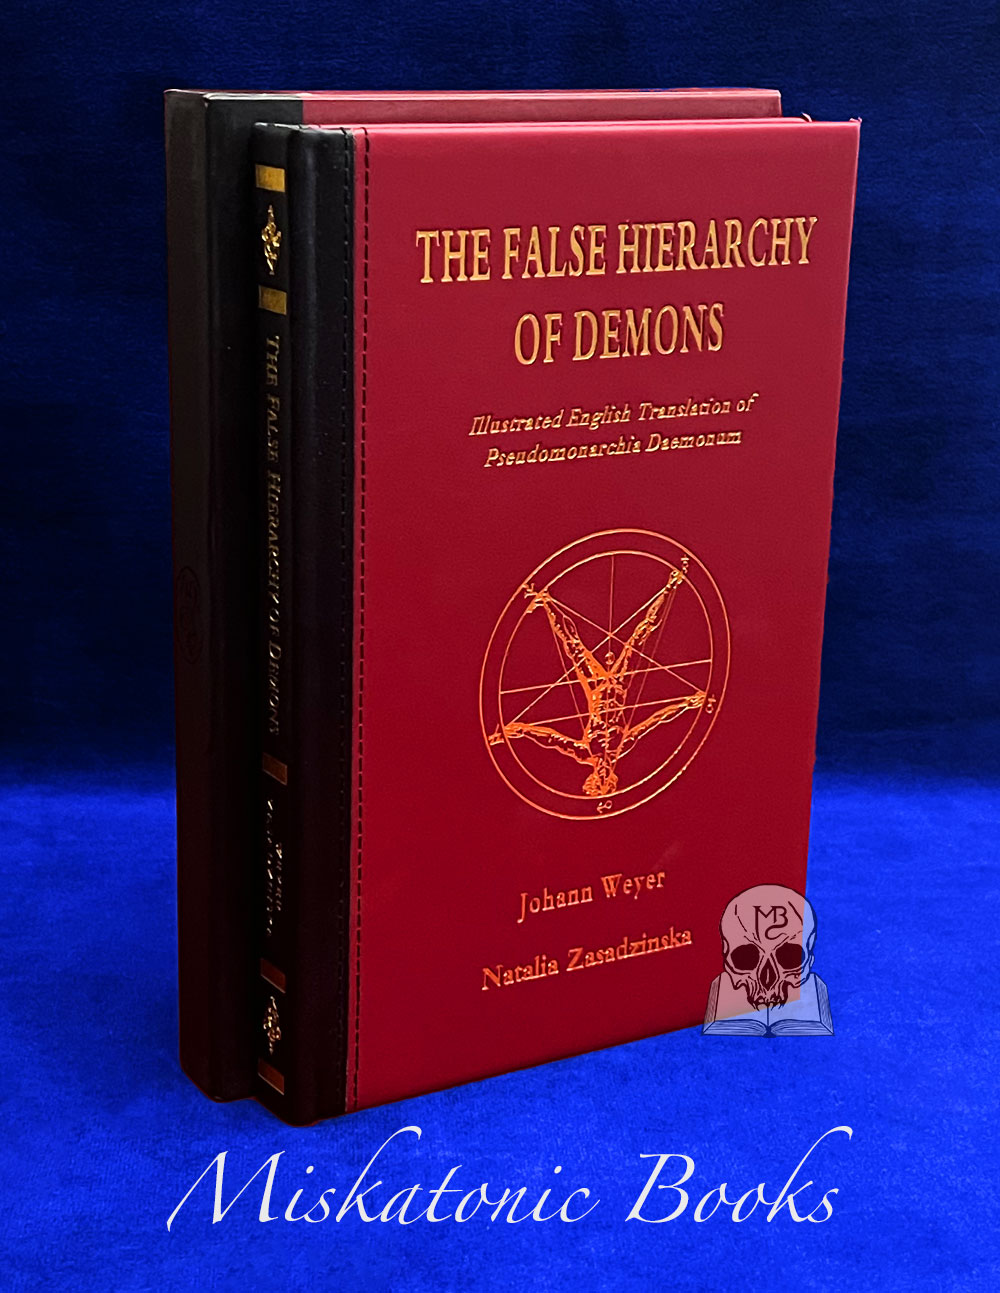 THE FALSE HIERARCHY OF DEMONS by Johann Weyer - Hardcover Edition in Custom Slipcase (Slipcase has bumped vorner)